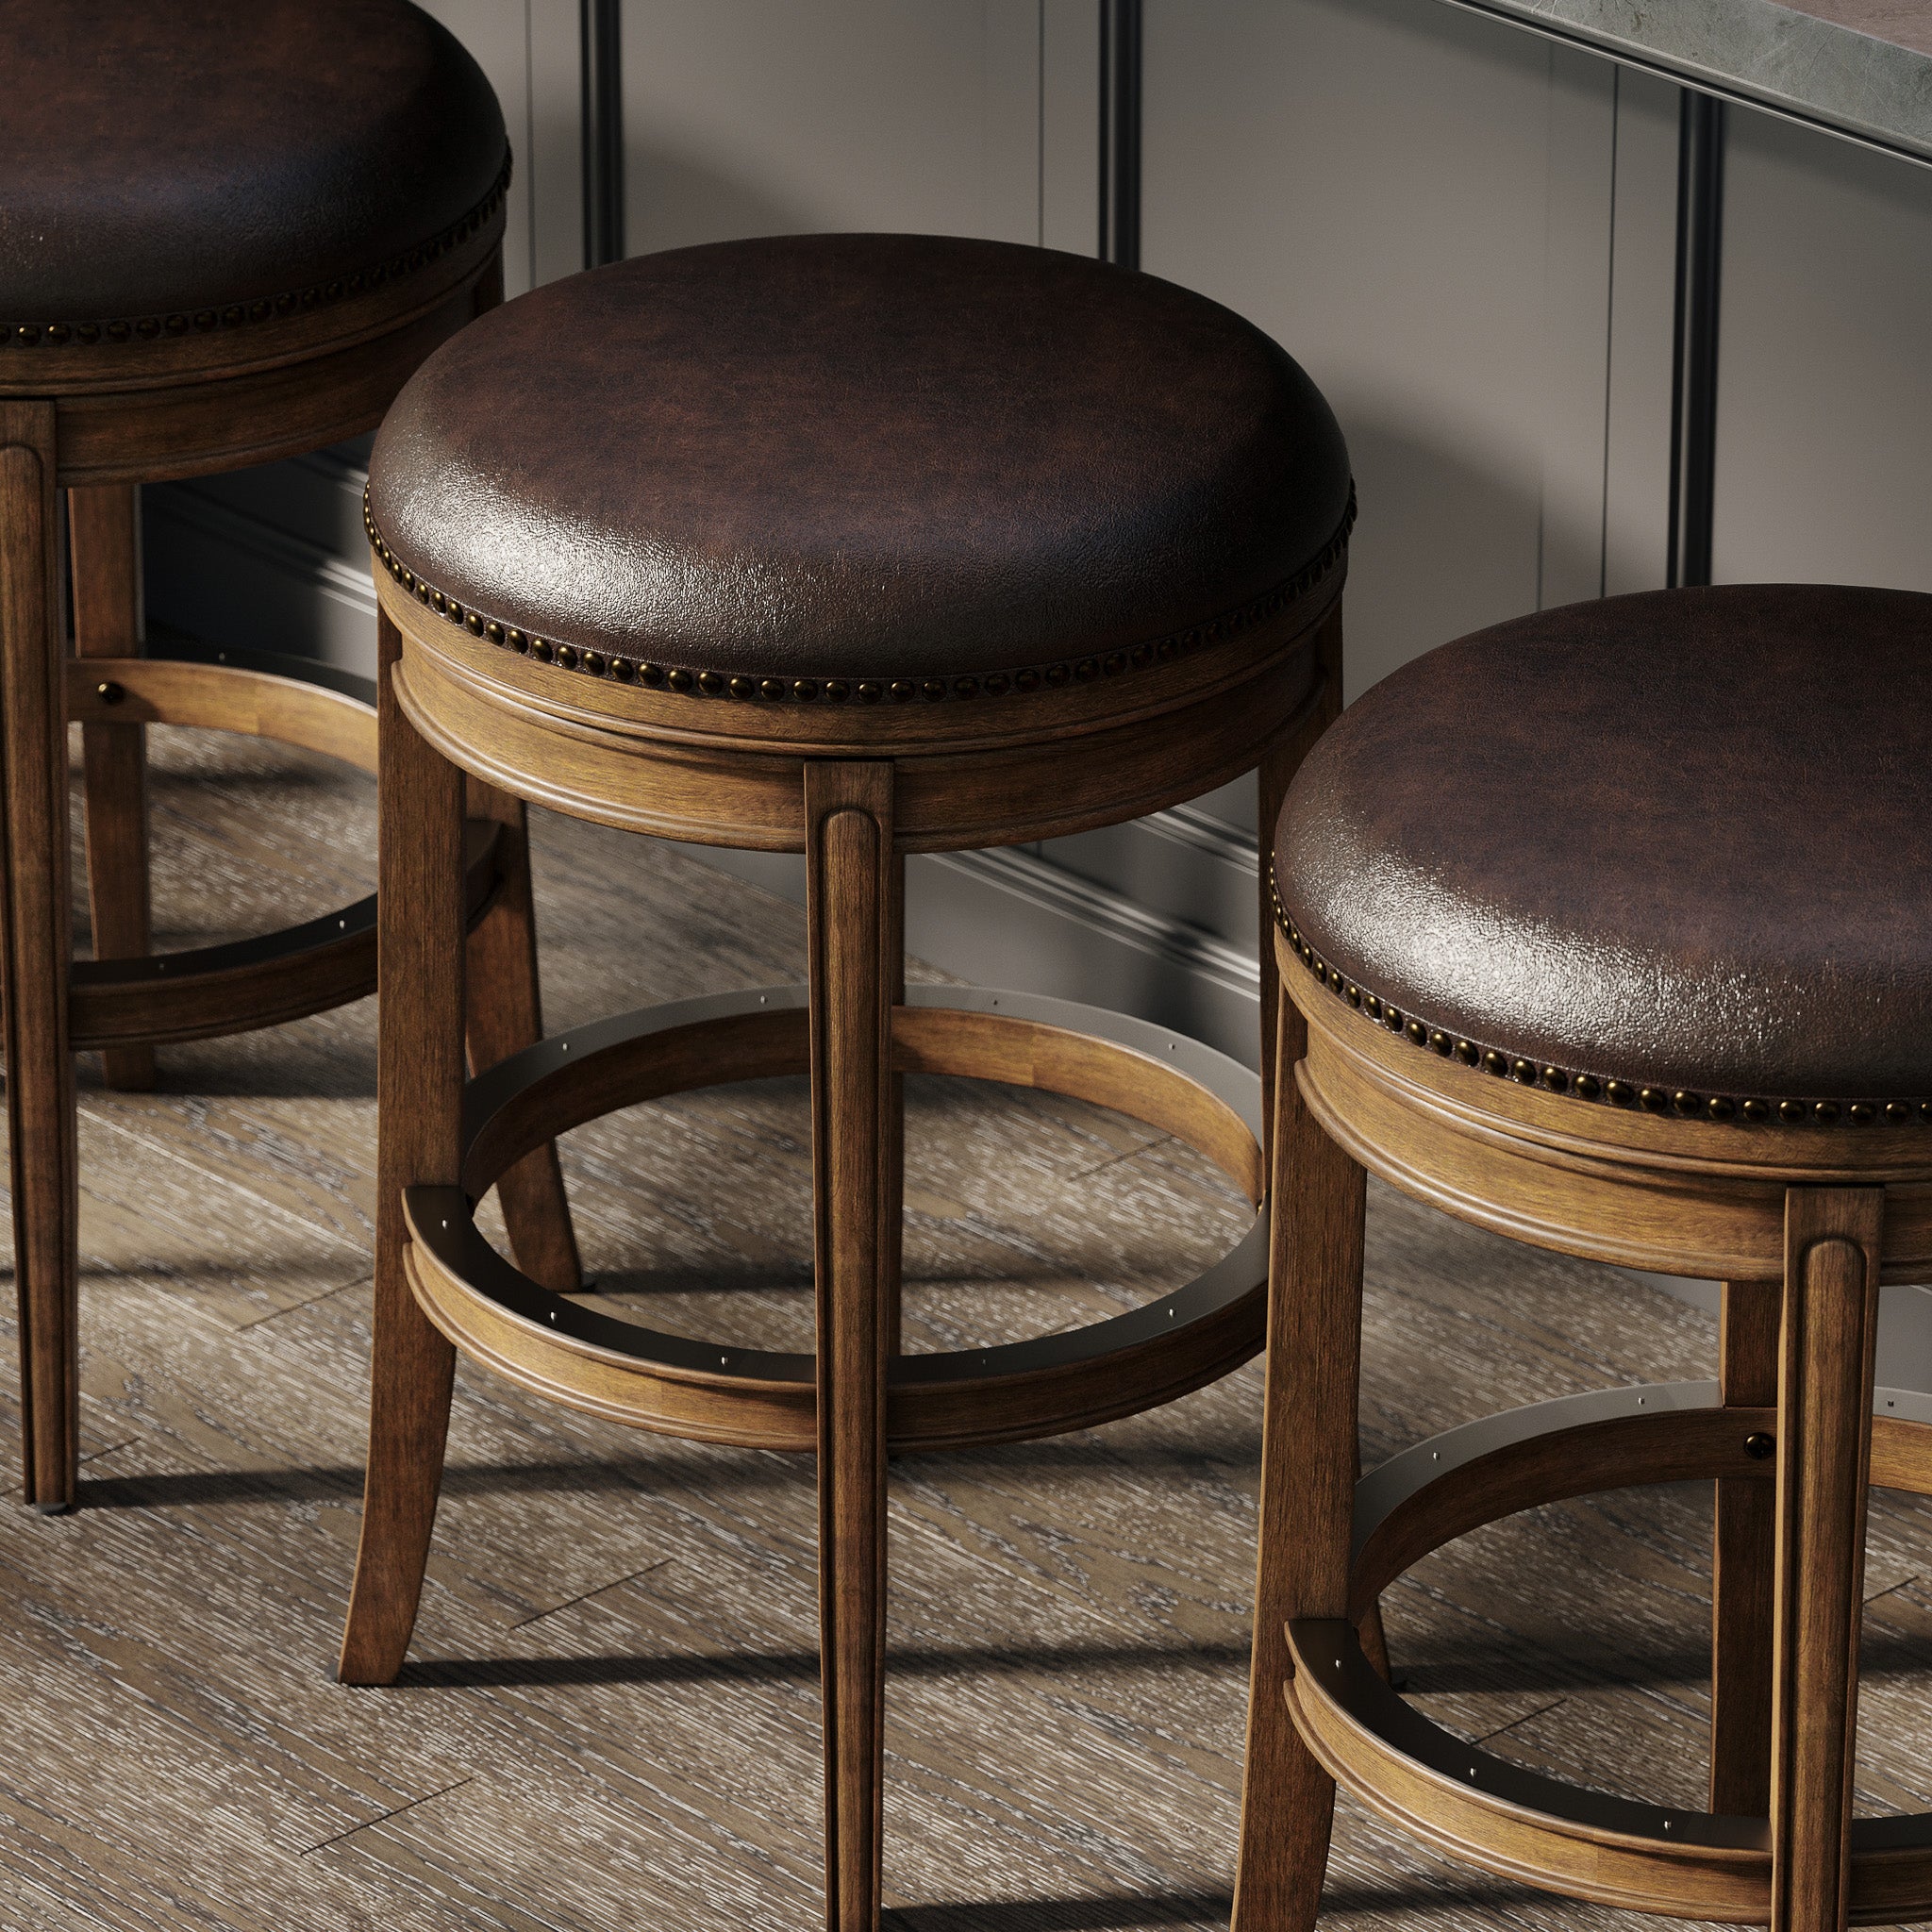 Alexander Backless Bar Stool in Walnut Finish with Marksman Saddle Vegan Leather in Stools by Maven Lane